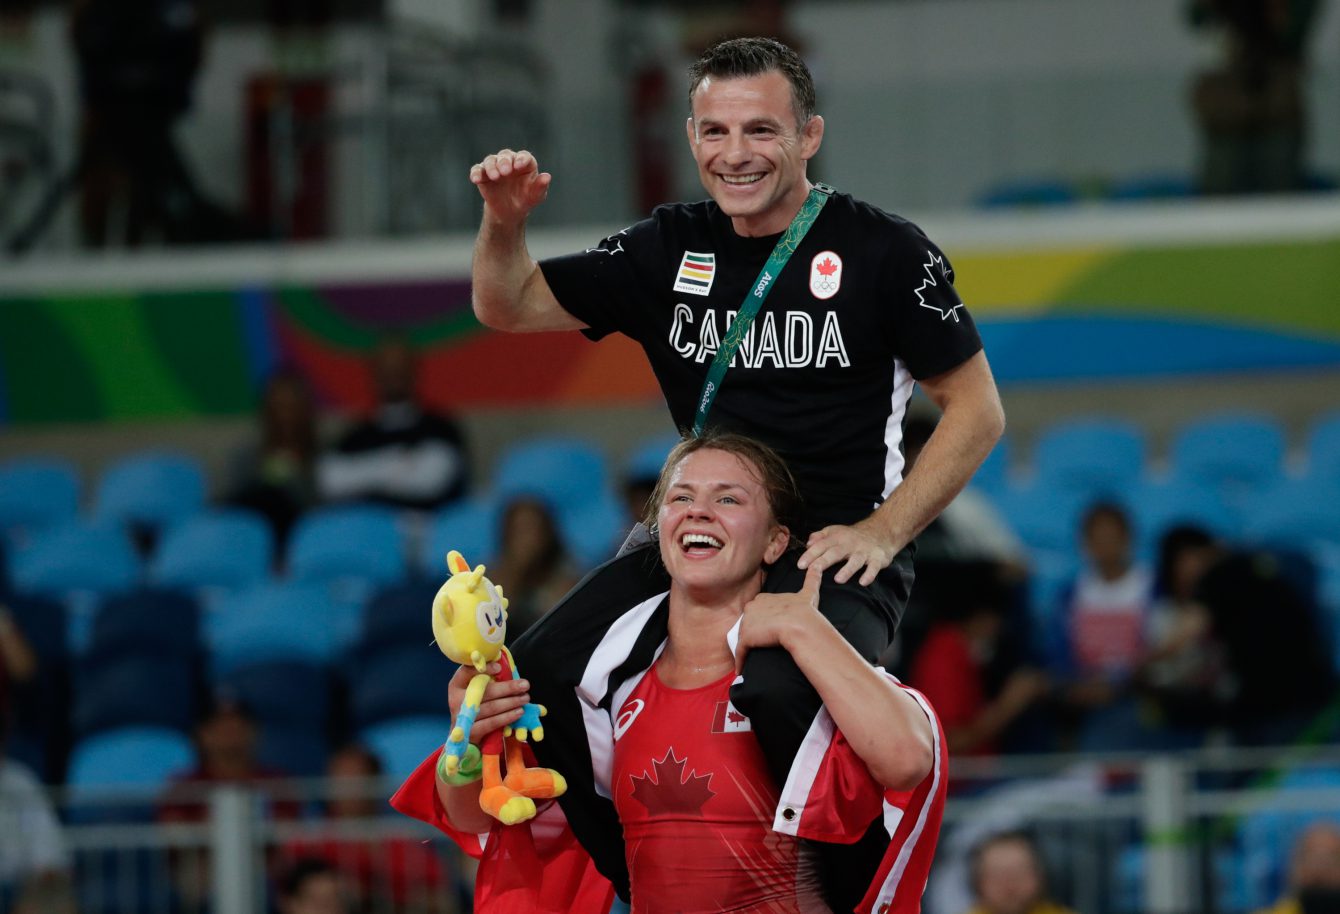 Erica Wiebe carries coach Paul Ragusa after after winning the gold medal during the women's 75kg freestyle wrestling competition at the 2016 Summer Olympics in Rio de Janeiro, Brazil, Thursday, Aug. 18, 2016. photo/ David Jackson